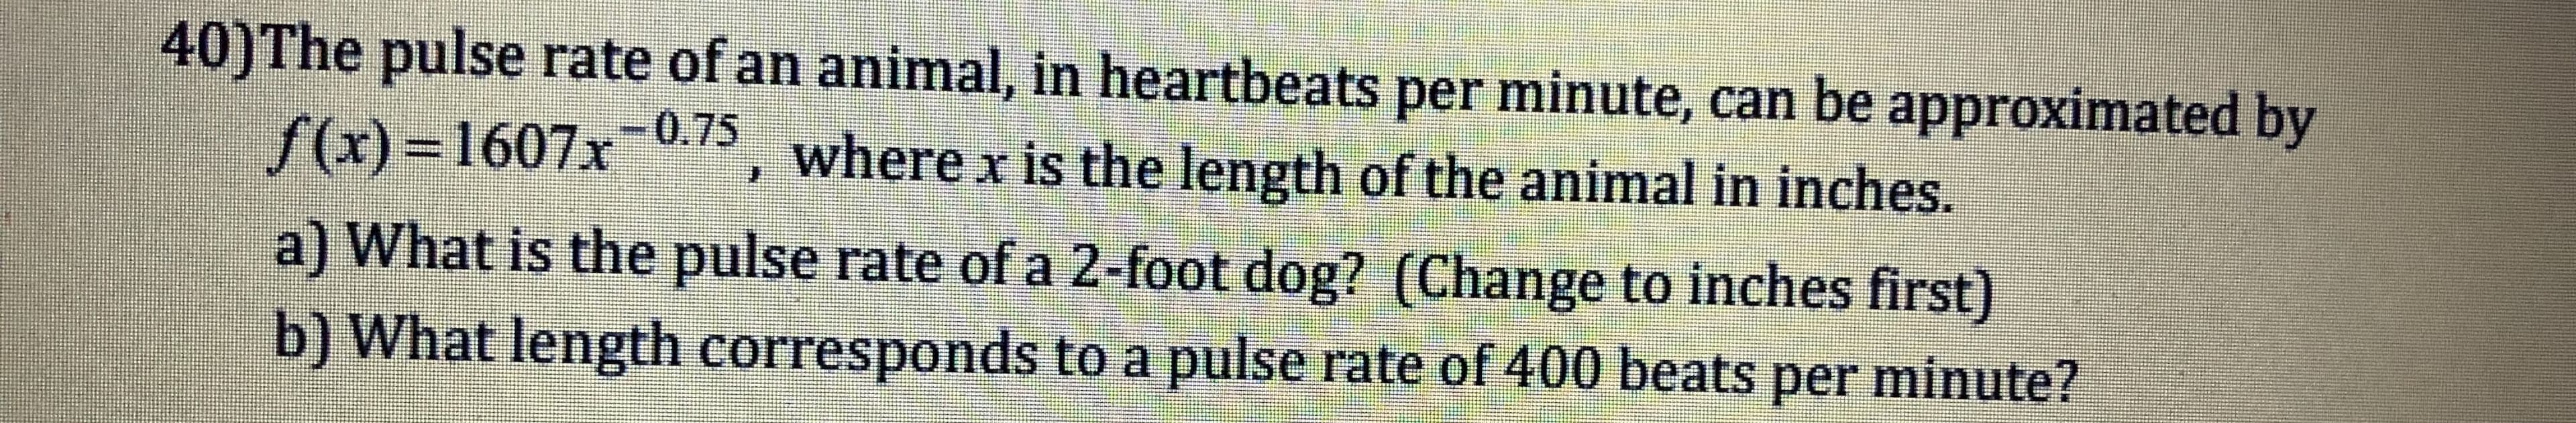 40)The pulse rate of an animal, in heartbeats per minute, can be approximated by
(x)-1607x 075, where x is the length of the animal in inches.
a) What is the pulse rate of a 2-foot dog? (Change to inches first)
b) What length corresponds to a pulse rate of 400 beats per minute?
